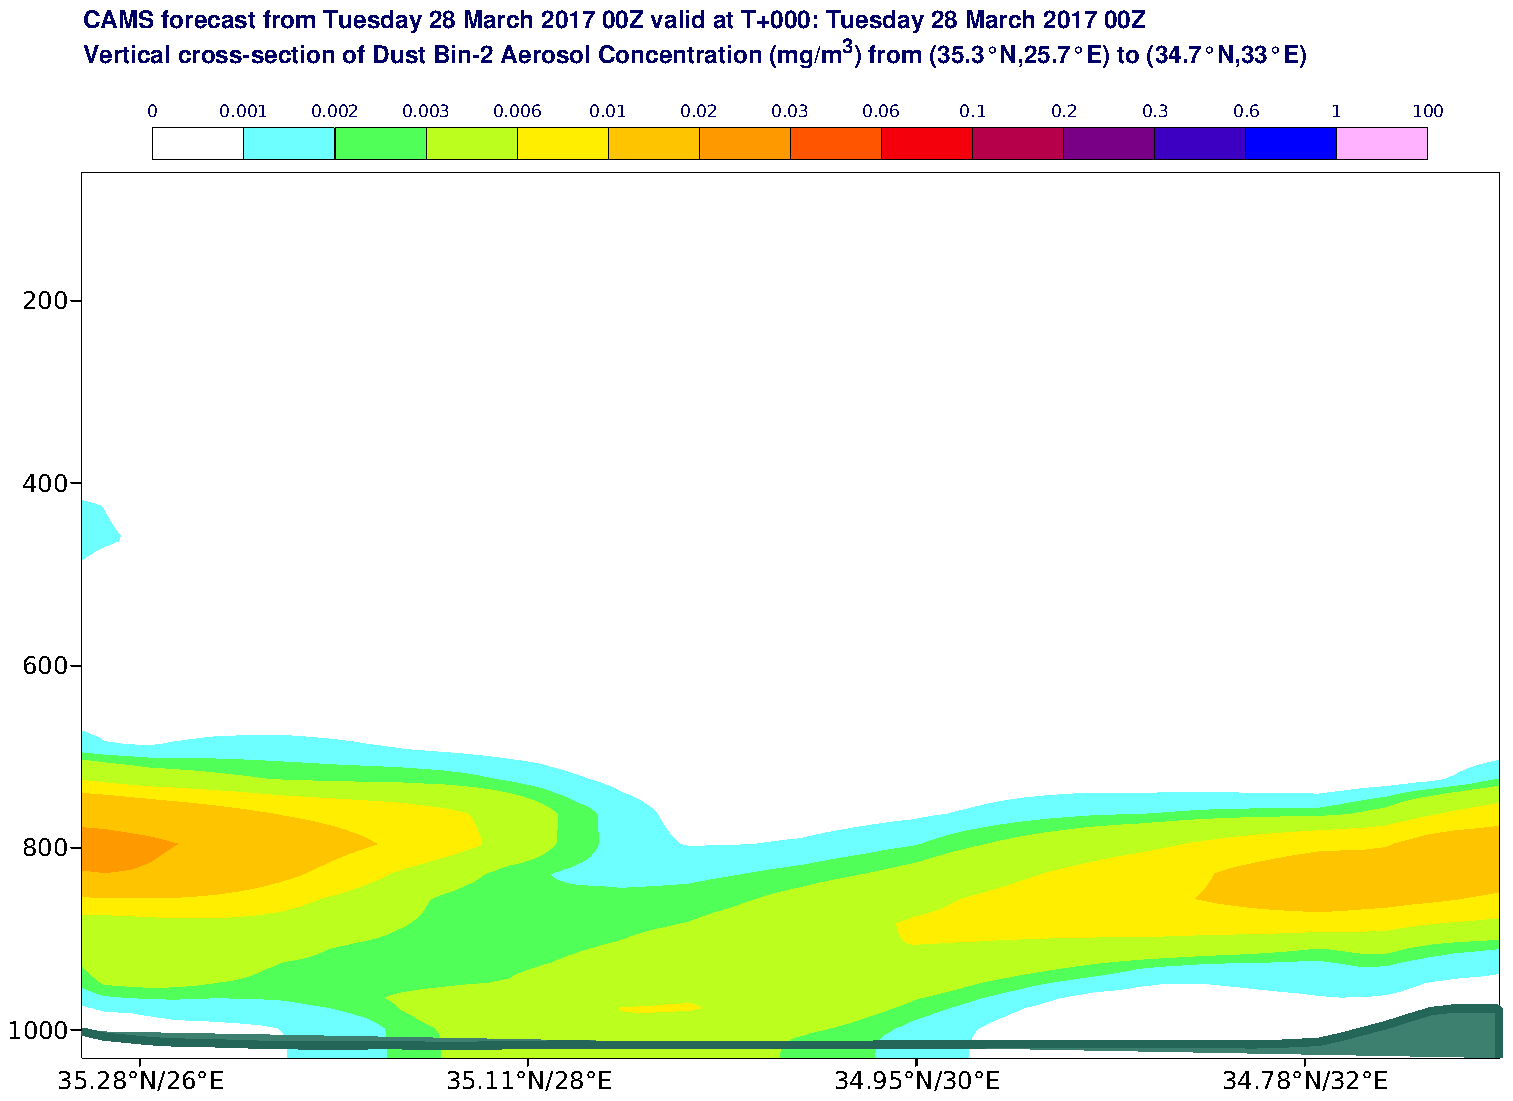 Vertical cross-section of Dust Bin-2 Aerosol Concentration (mg/m3) valid at T0 - 2017-03-28 00:00